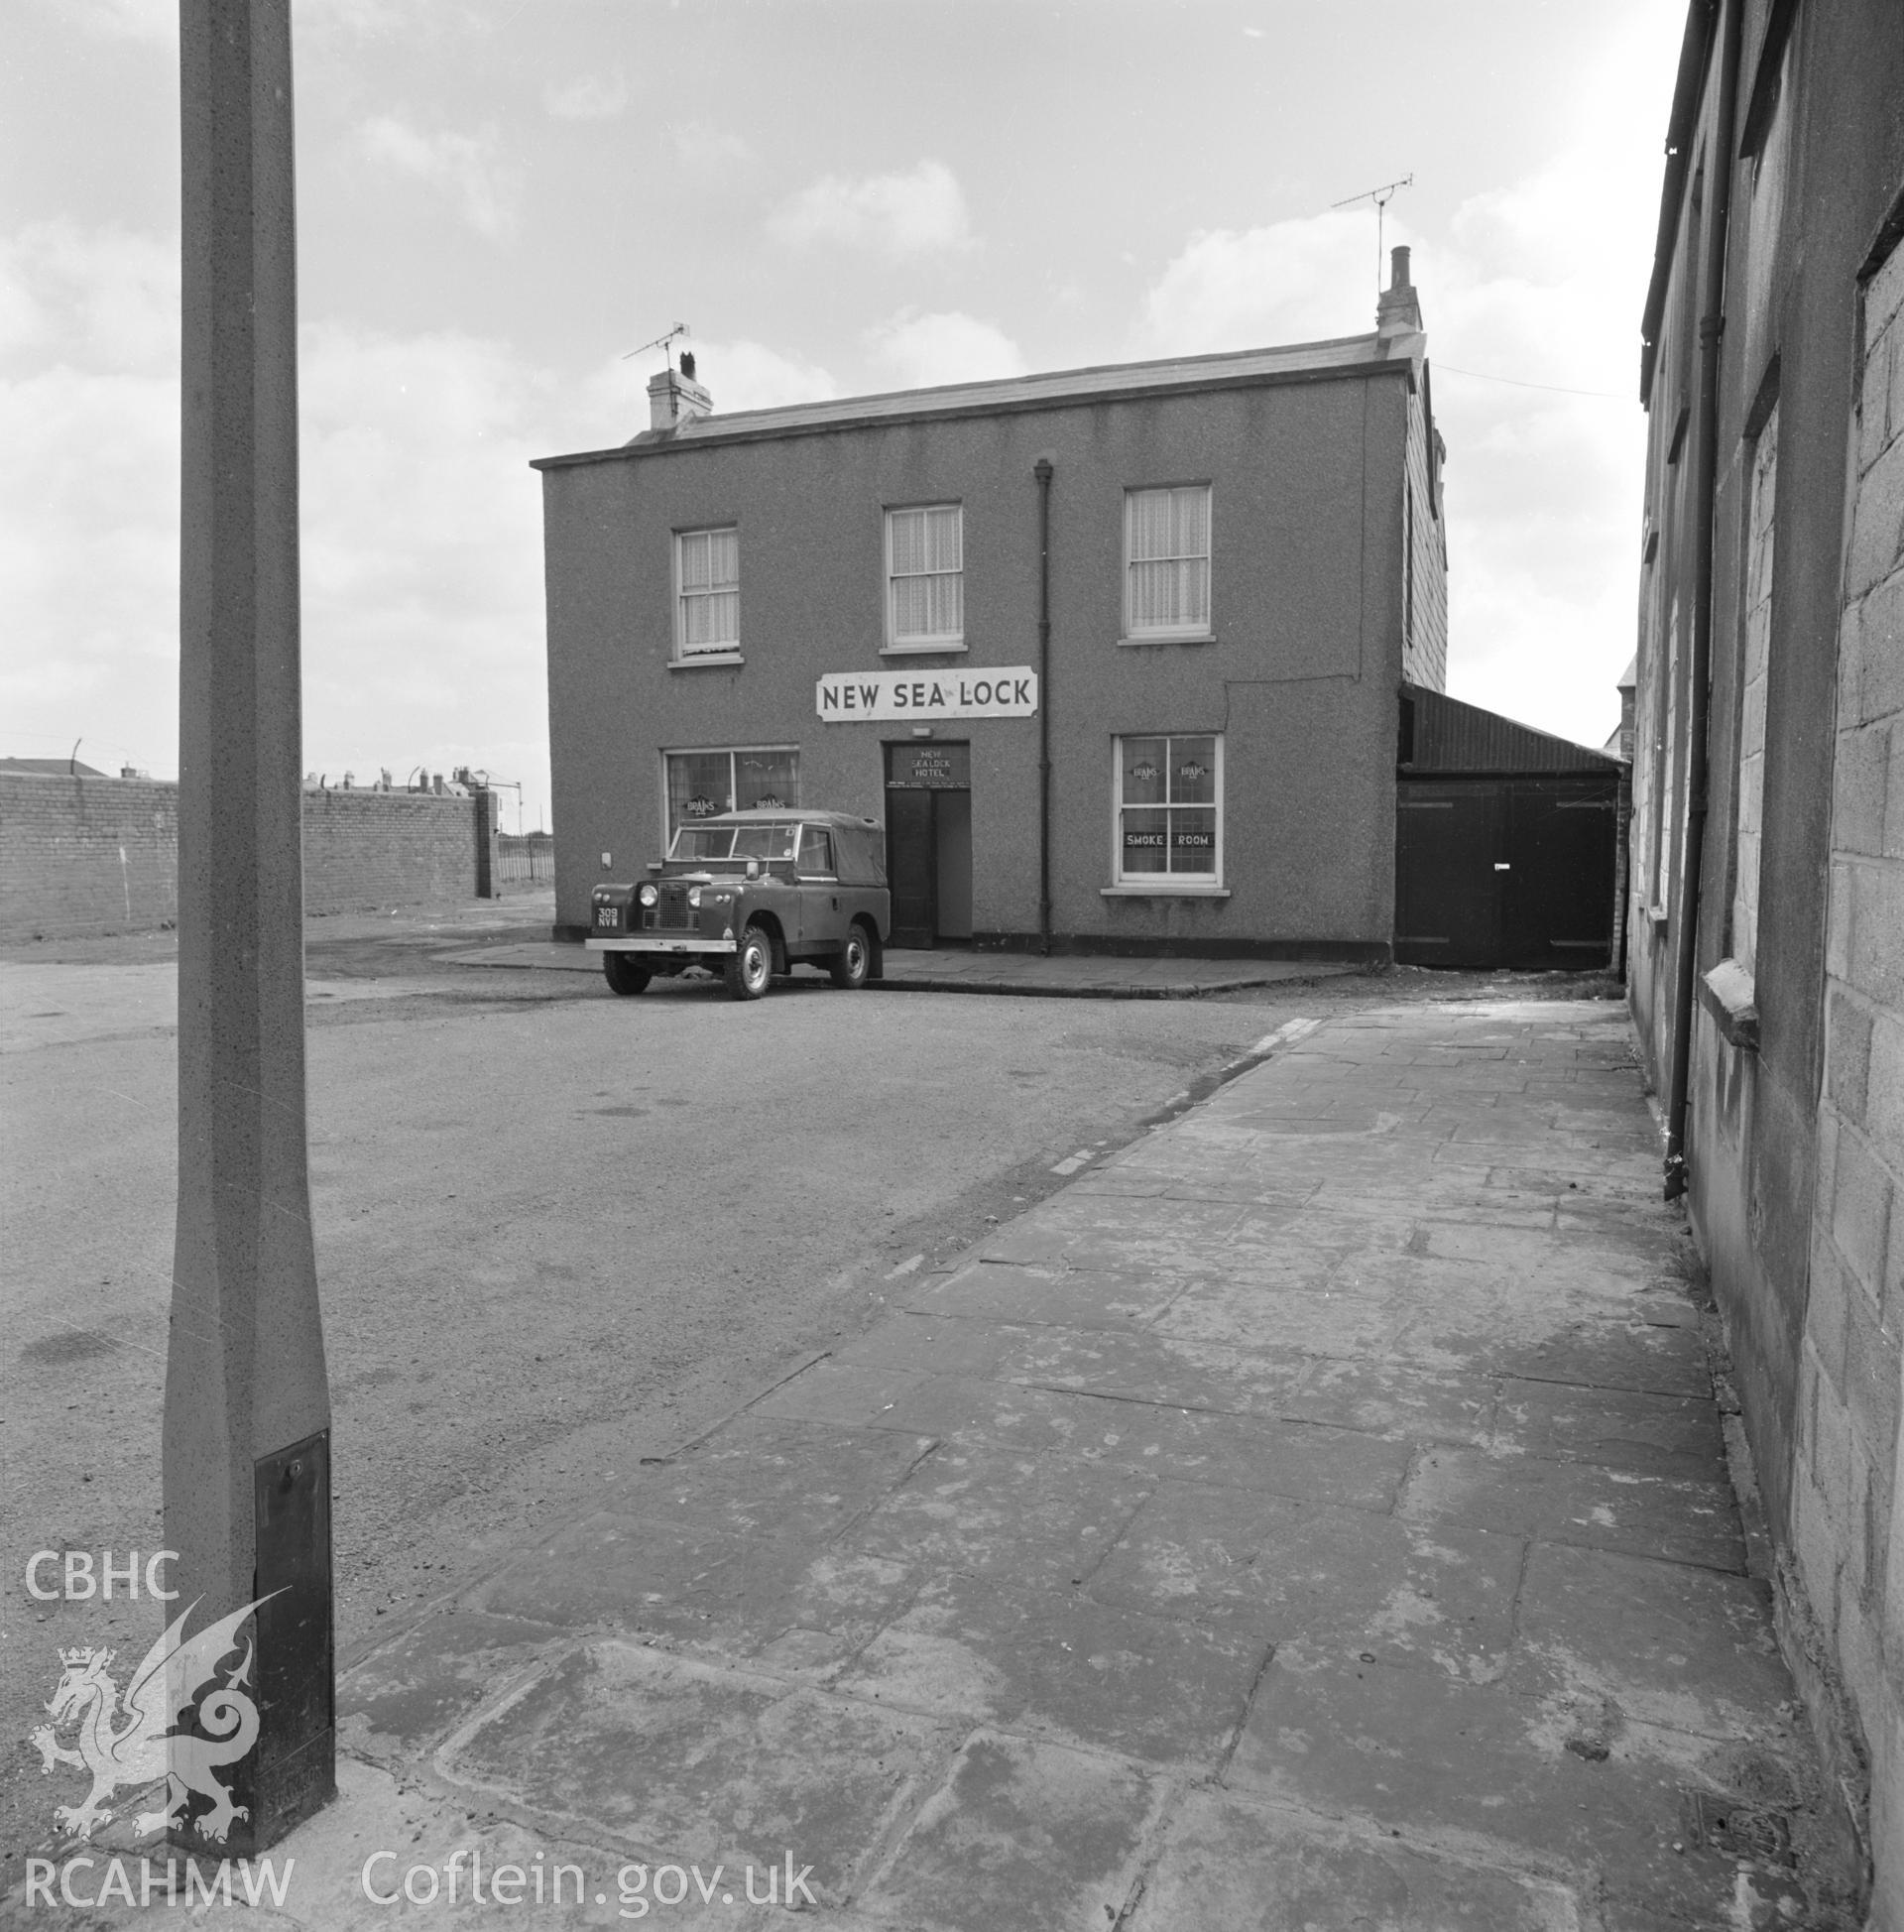 Digital copy of a black and white negative showing New Sea Lock Hotel, Cardiff.